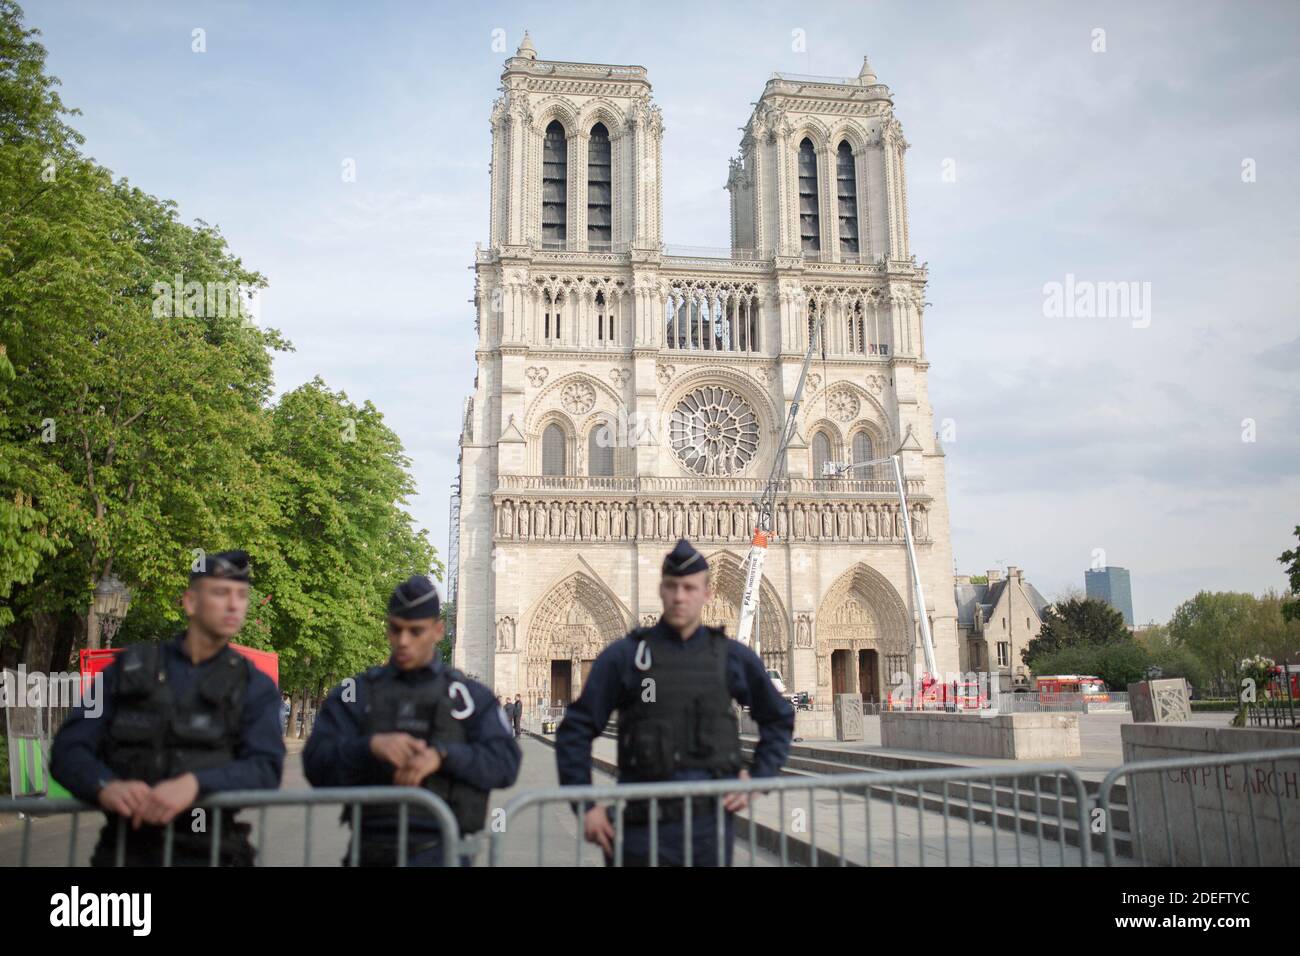 Police Forces in front of the cathedral notre dame Anne Hidalgo tours Notre Dame cathedral on April 18, 2019 in Paris. France paid a daylong tribute on April 18, 2019 to the Paris firefighters who saved Notre Dame Cathedral from collapse, while construction workers rushed to secure an area above one of the church's famed rose-shaped windows and other vulnerable sections of the fire-damaged landmark. Photo by Raphael Lafargue/ABACAPRESS.COM Stock Photo